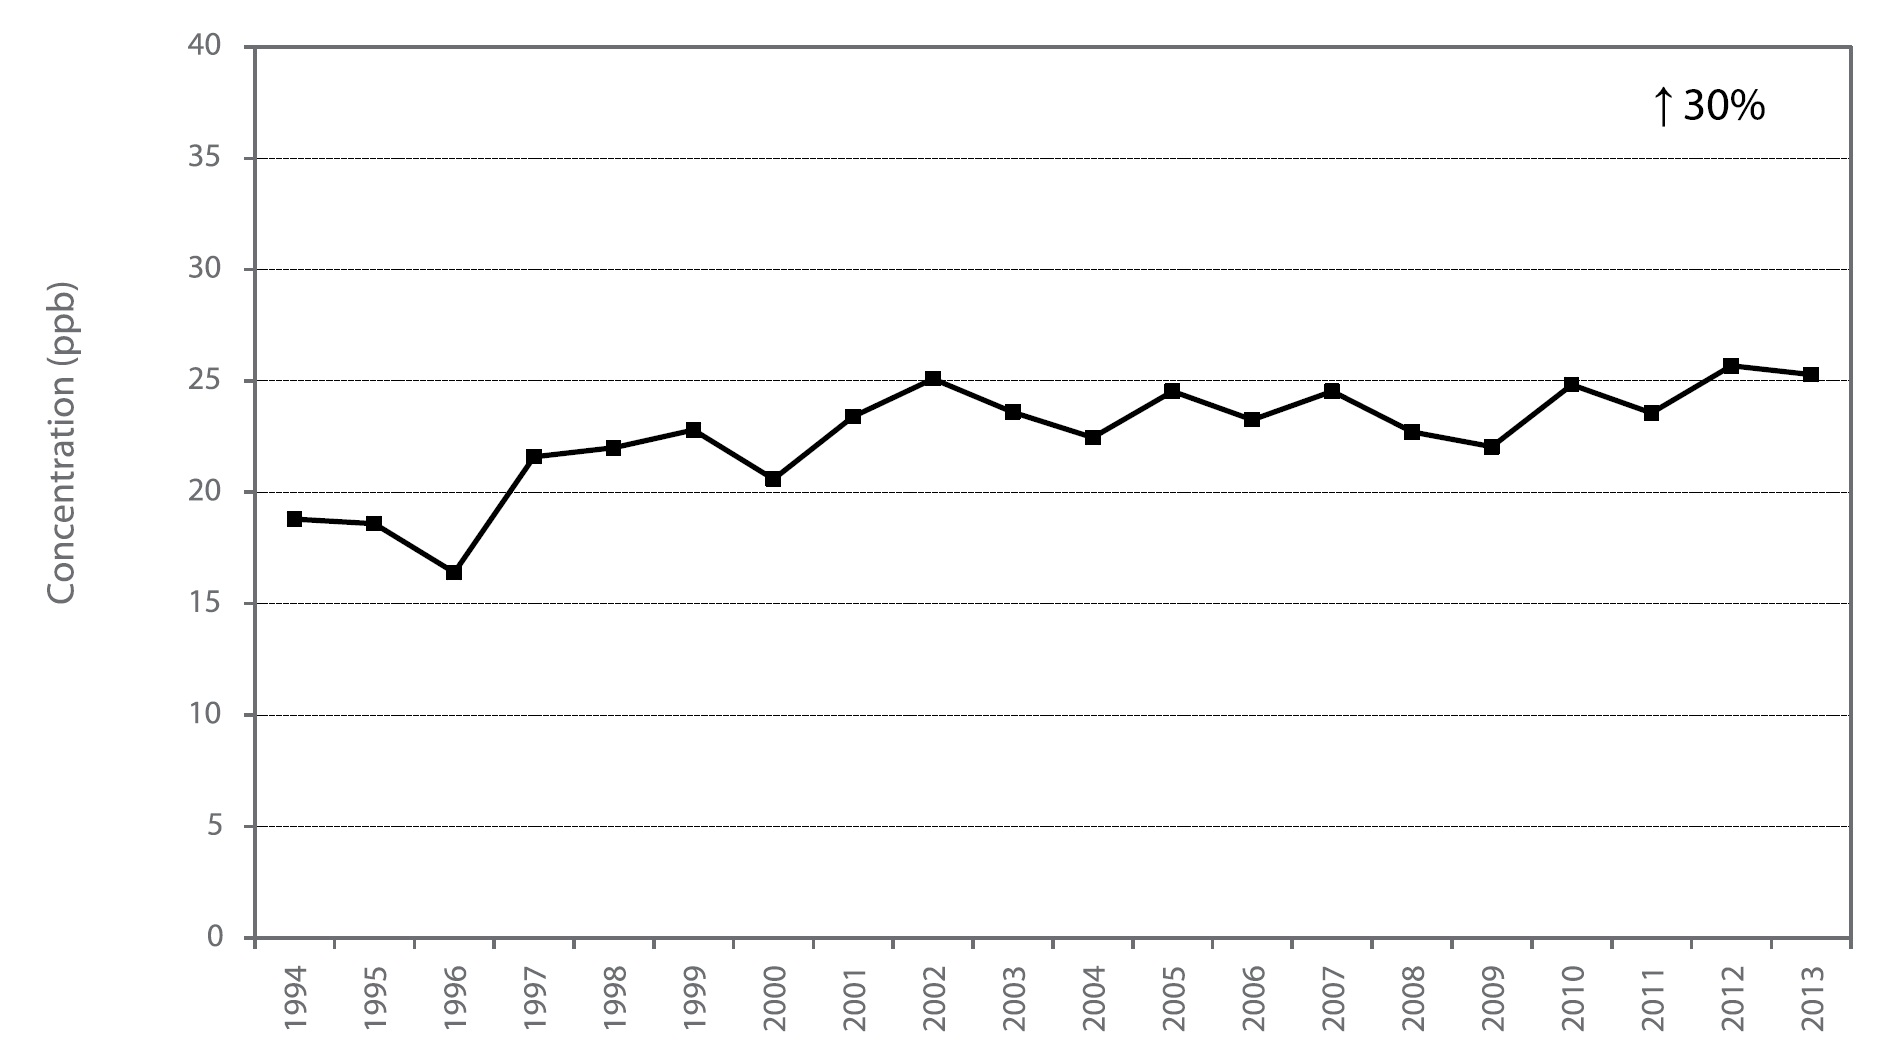 Figure A15 is a line chart displaying the ozone annual mean at Toronto North from 1994 to 2013. Over this 20-year period, ozone increased 30%.